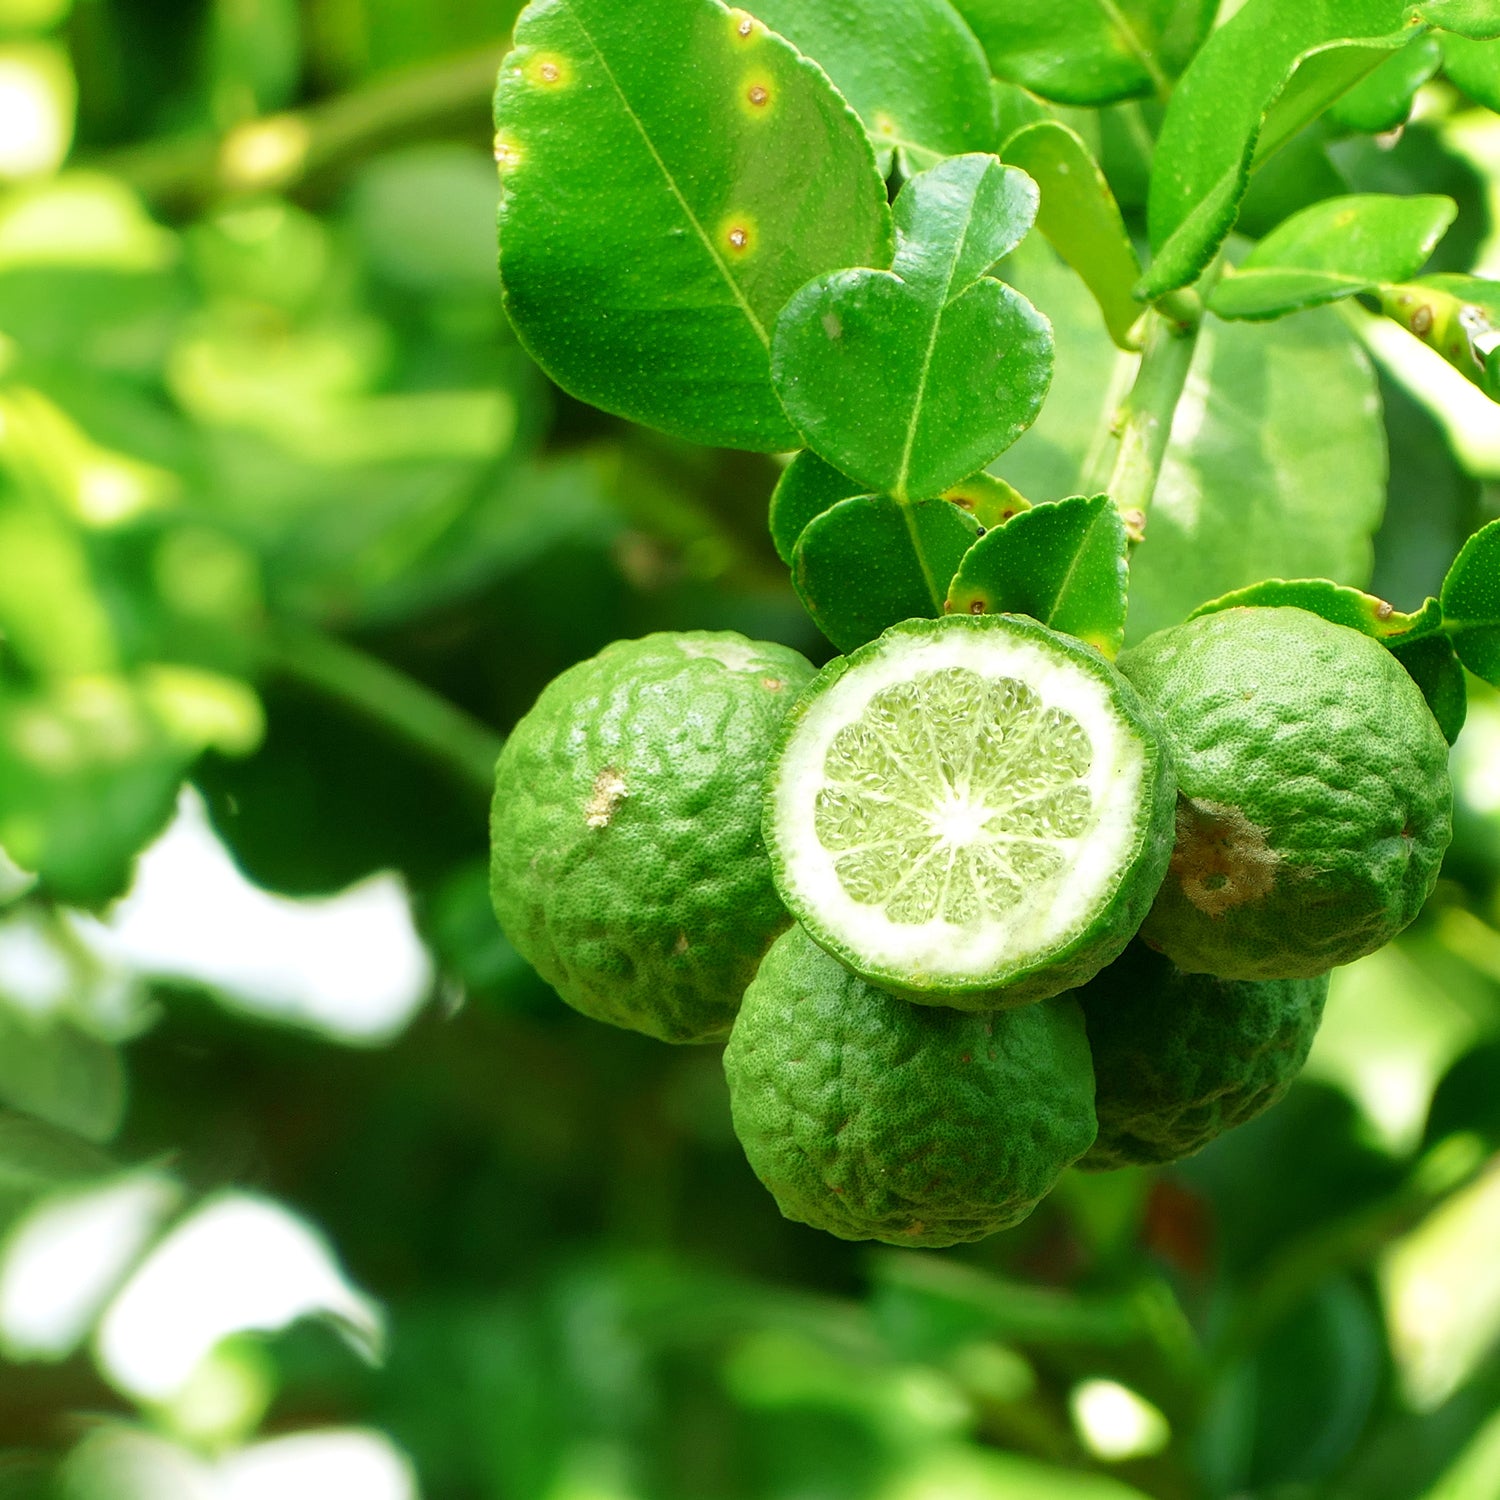 Fresh bergamot - one of the key fragrance components in this fresh scented candle